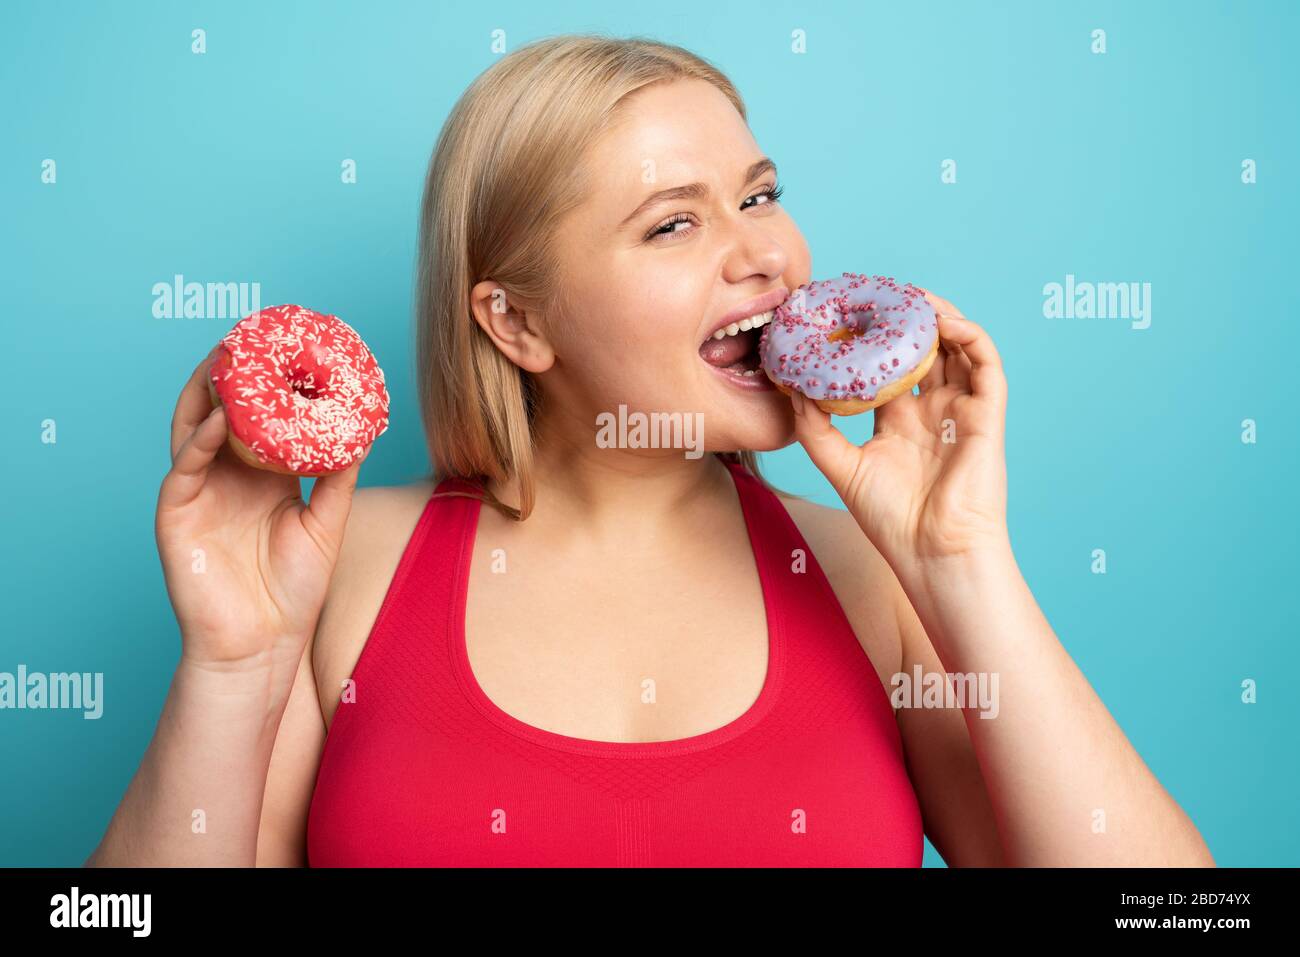 Fat girl eats sweet instead of do gym. Cyan background Stock Photo